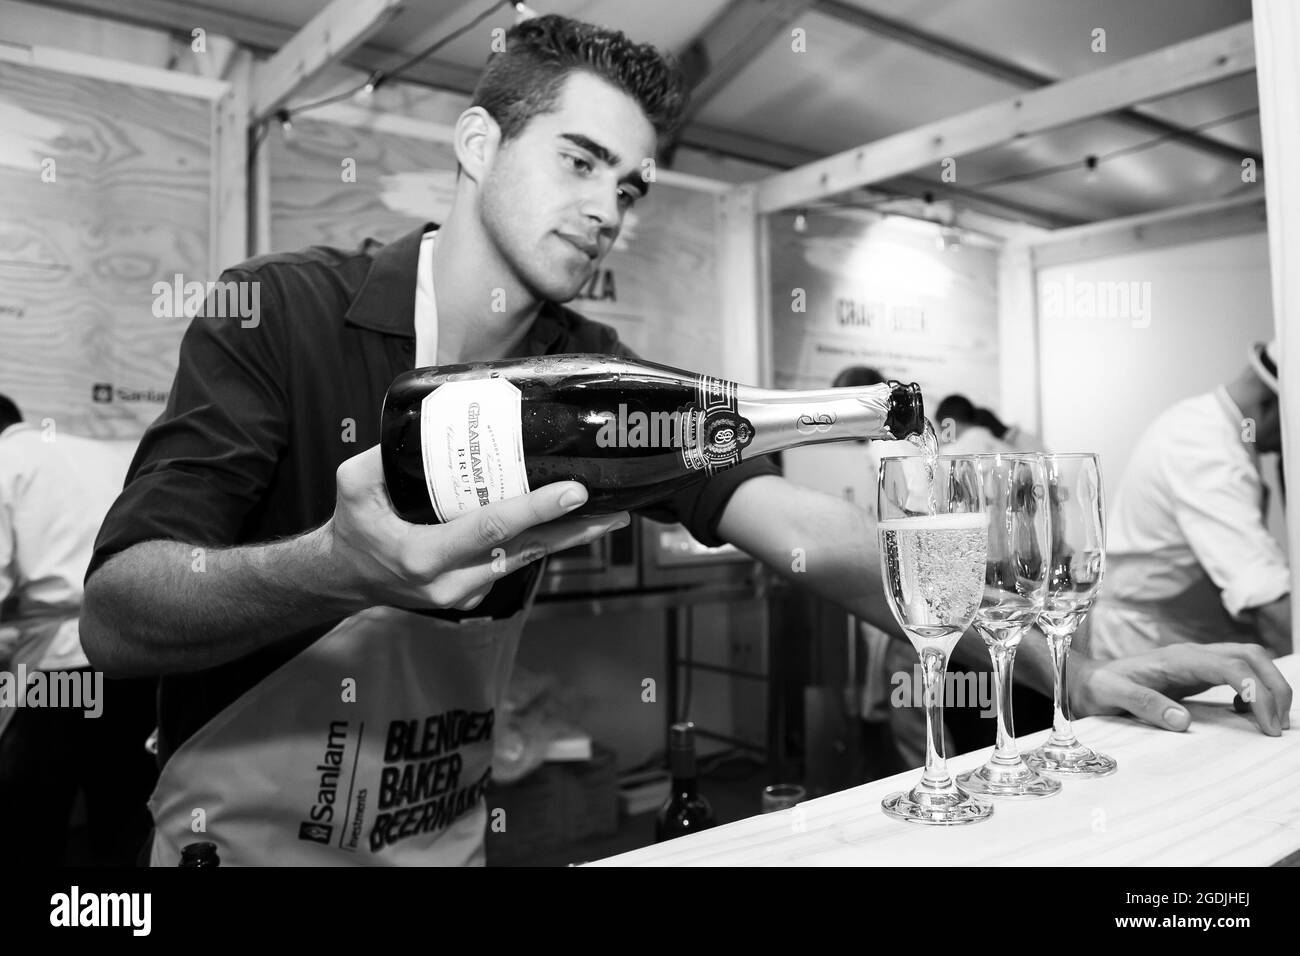 JOHANNESBURG, SOUTH AFRICA - Jan 05, 2021: A bartender pouring a glass of sparkling wine at the food festival in Johannesburg, South Africa Stock Photo